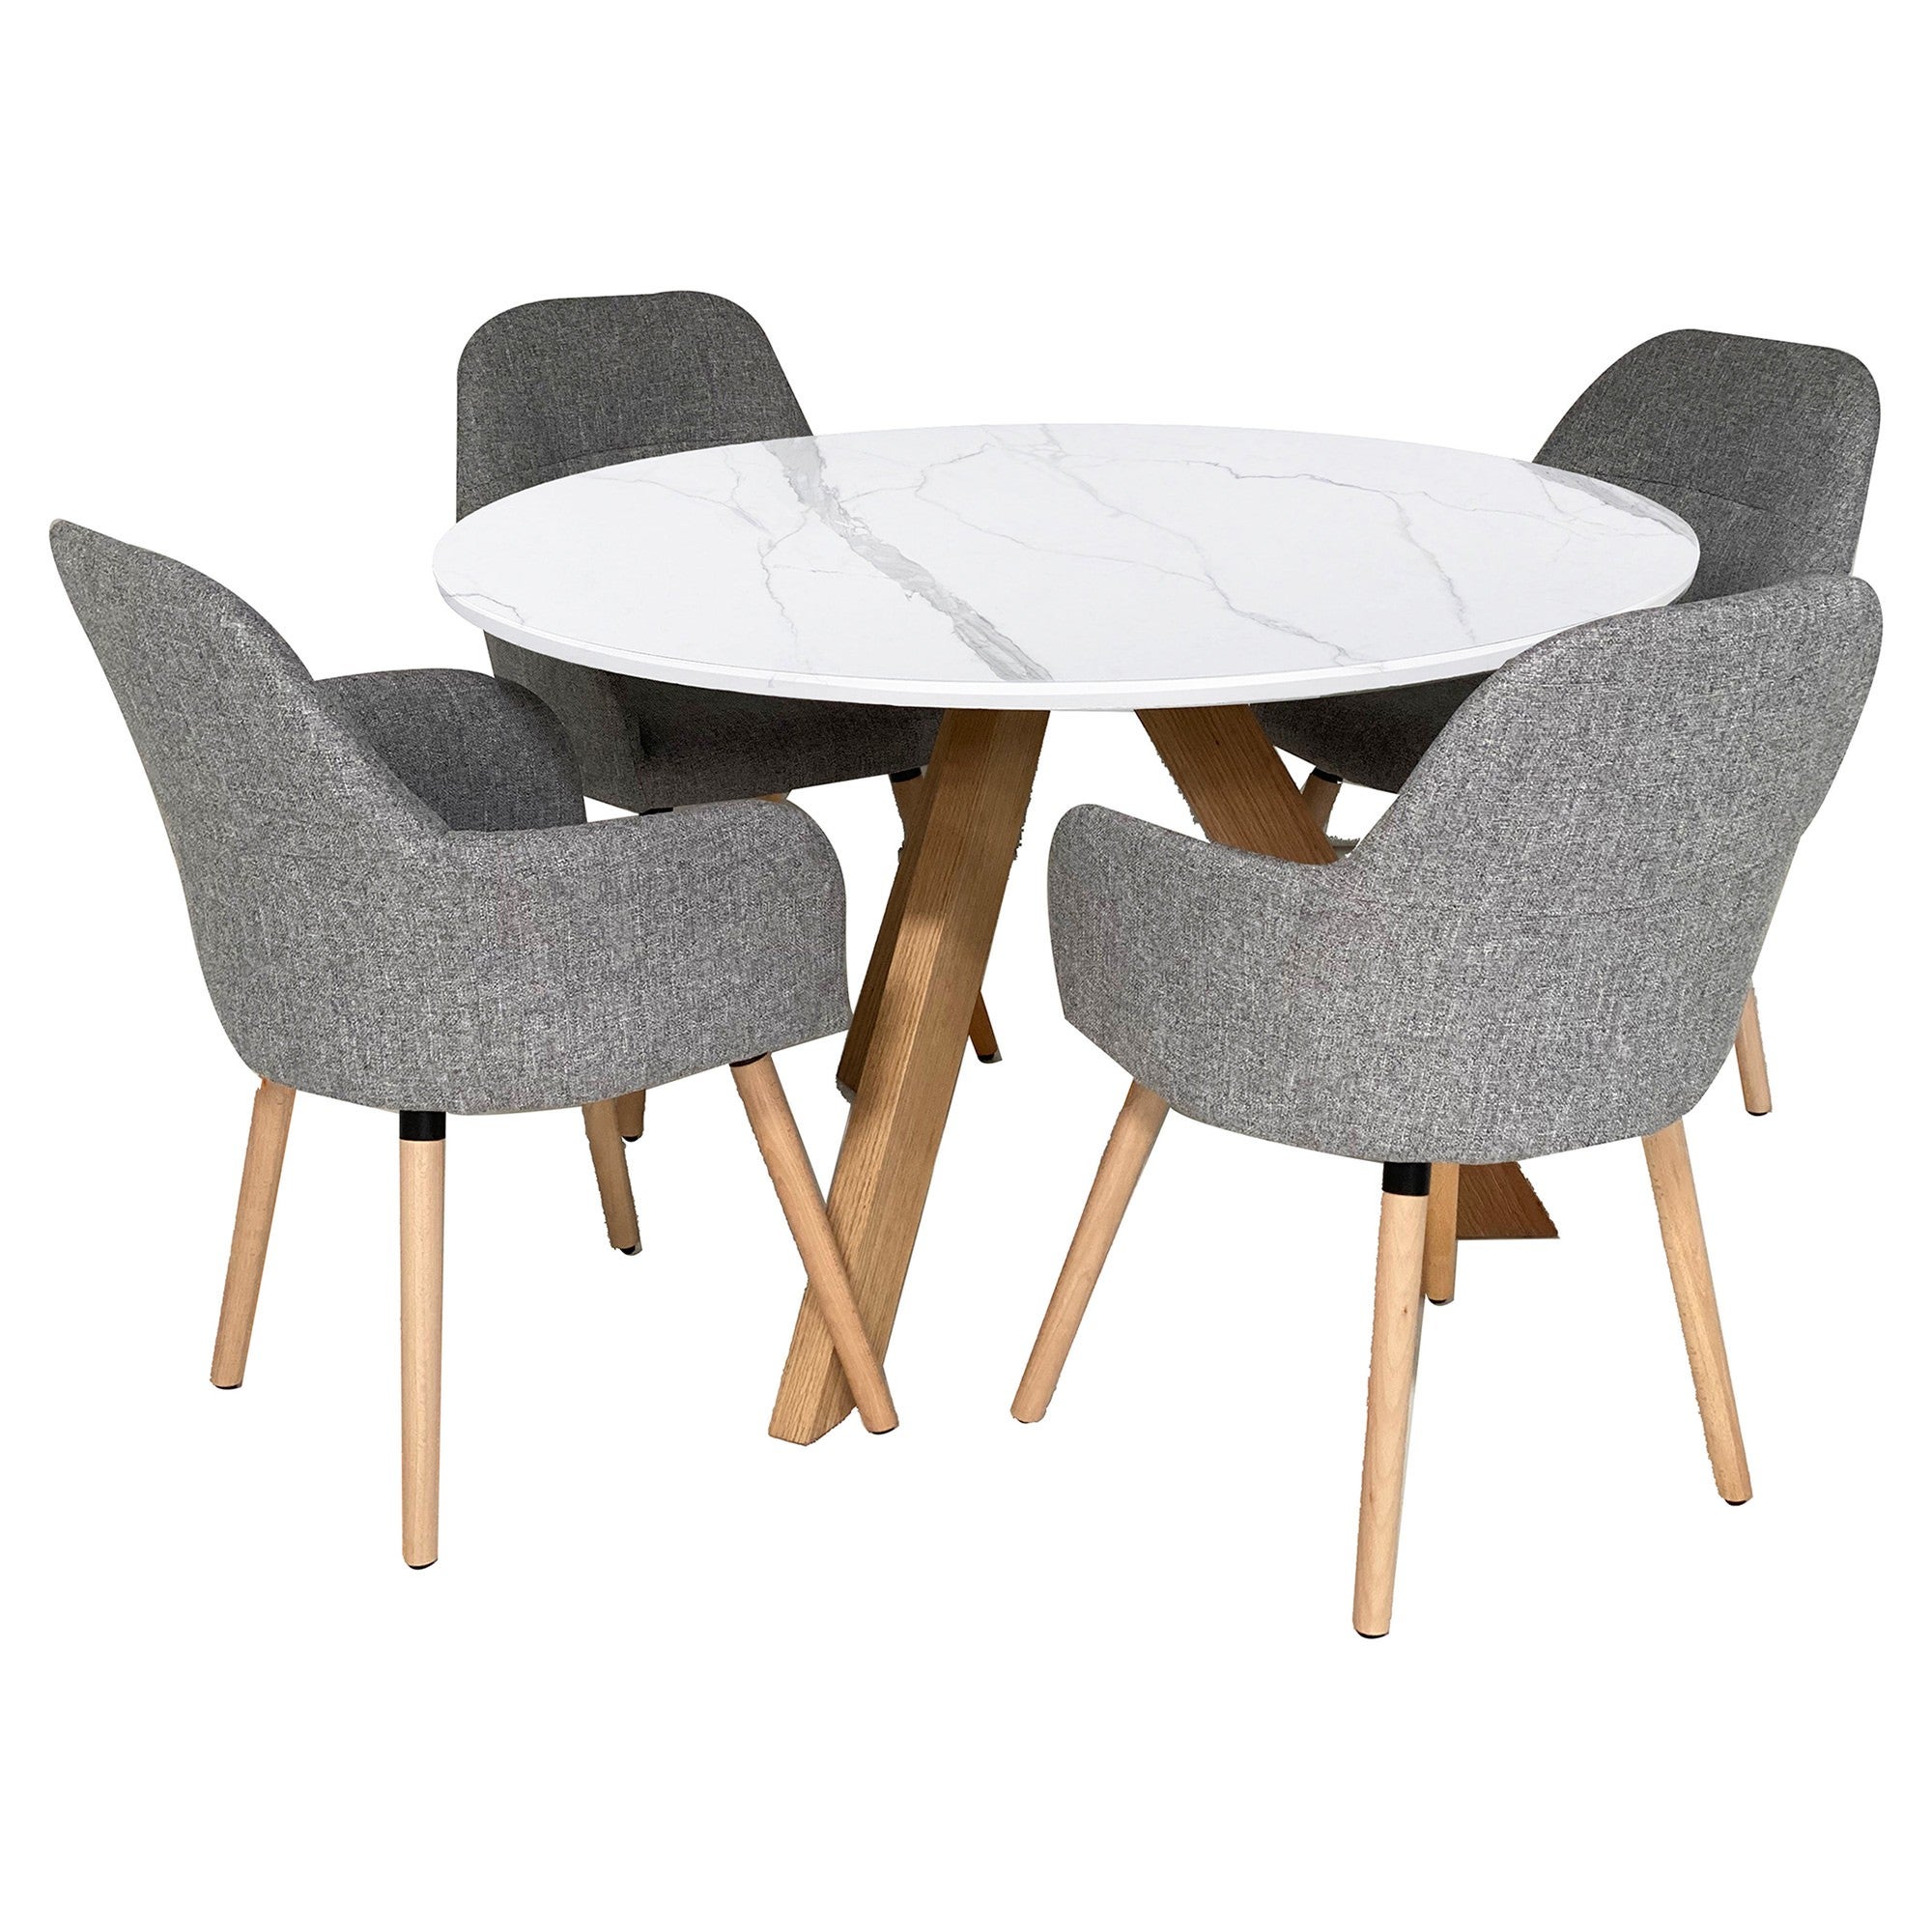 Morris 5 Piece Sintered Stone Top Round Dining Table Set, 120cm, with Grey Milan Chair